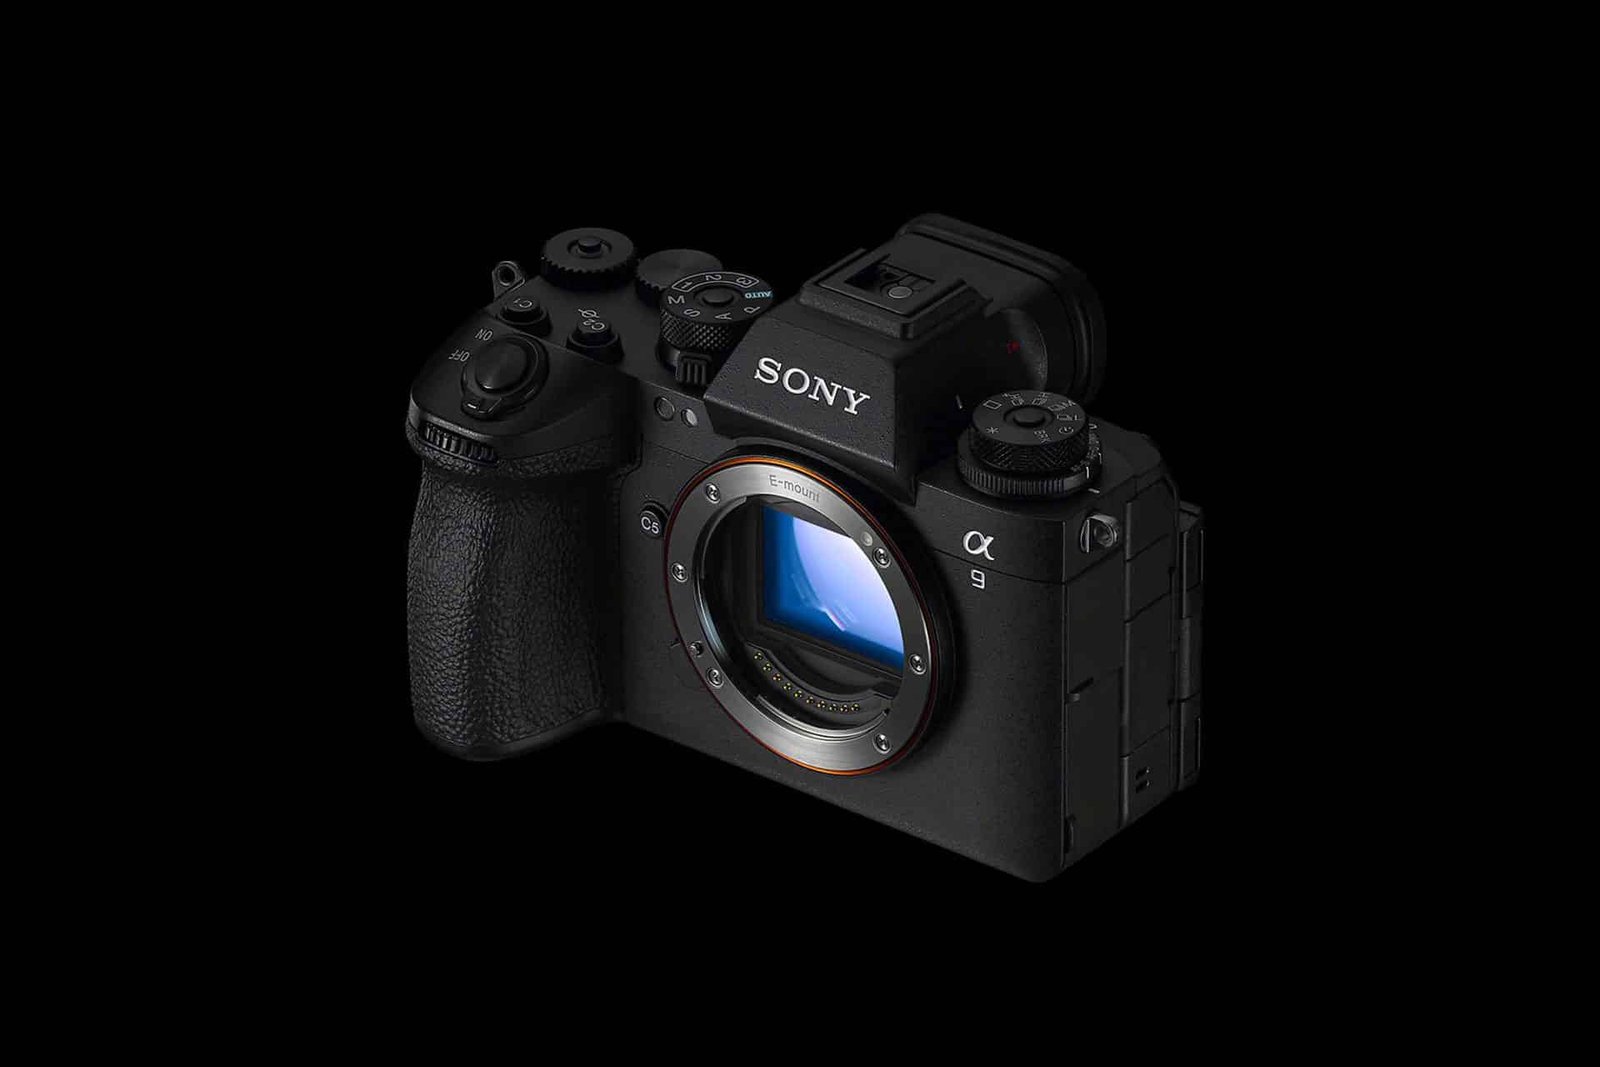 Sony Alpha 9 III: Full-frame camera with fast speed global shutter